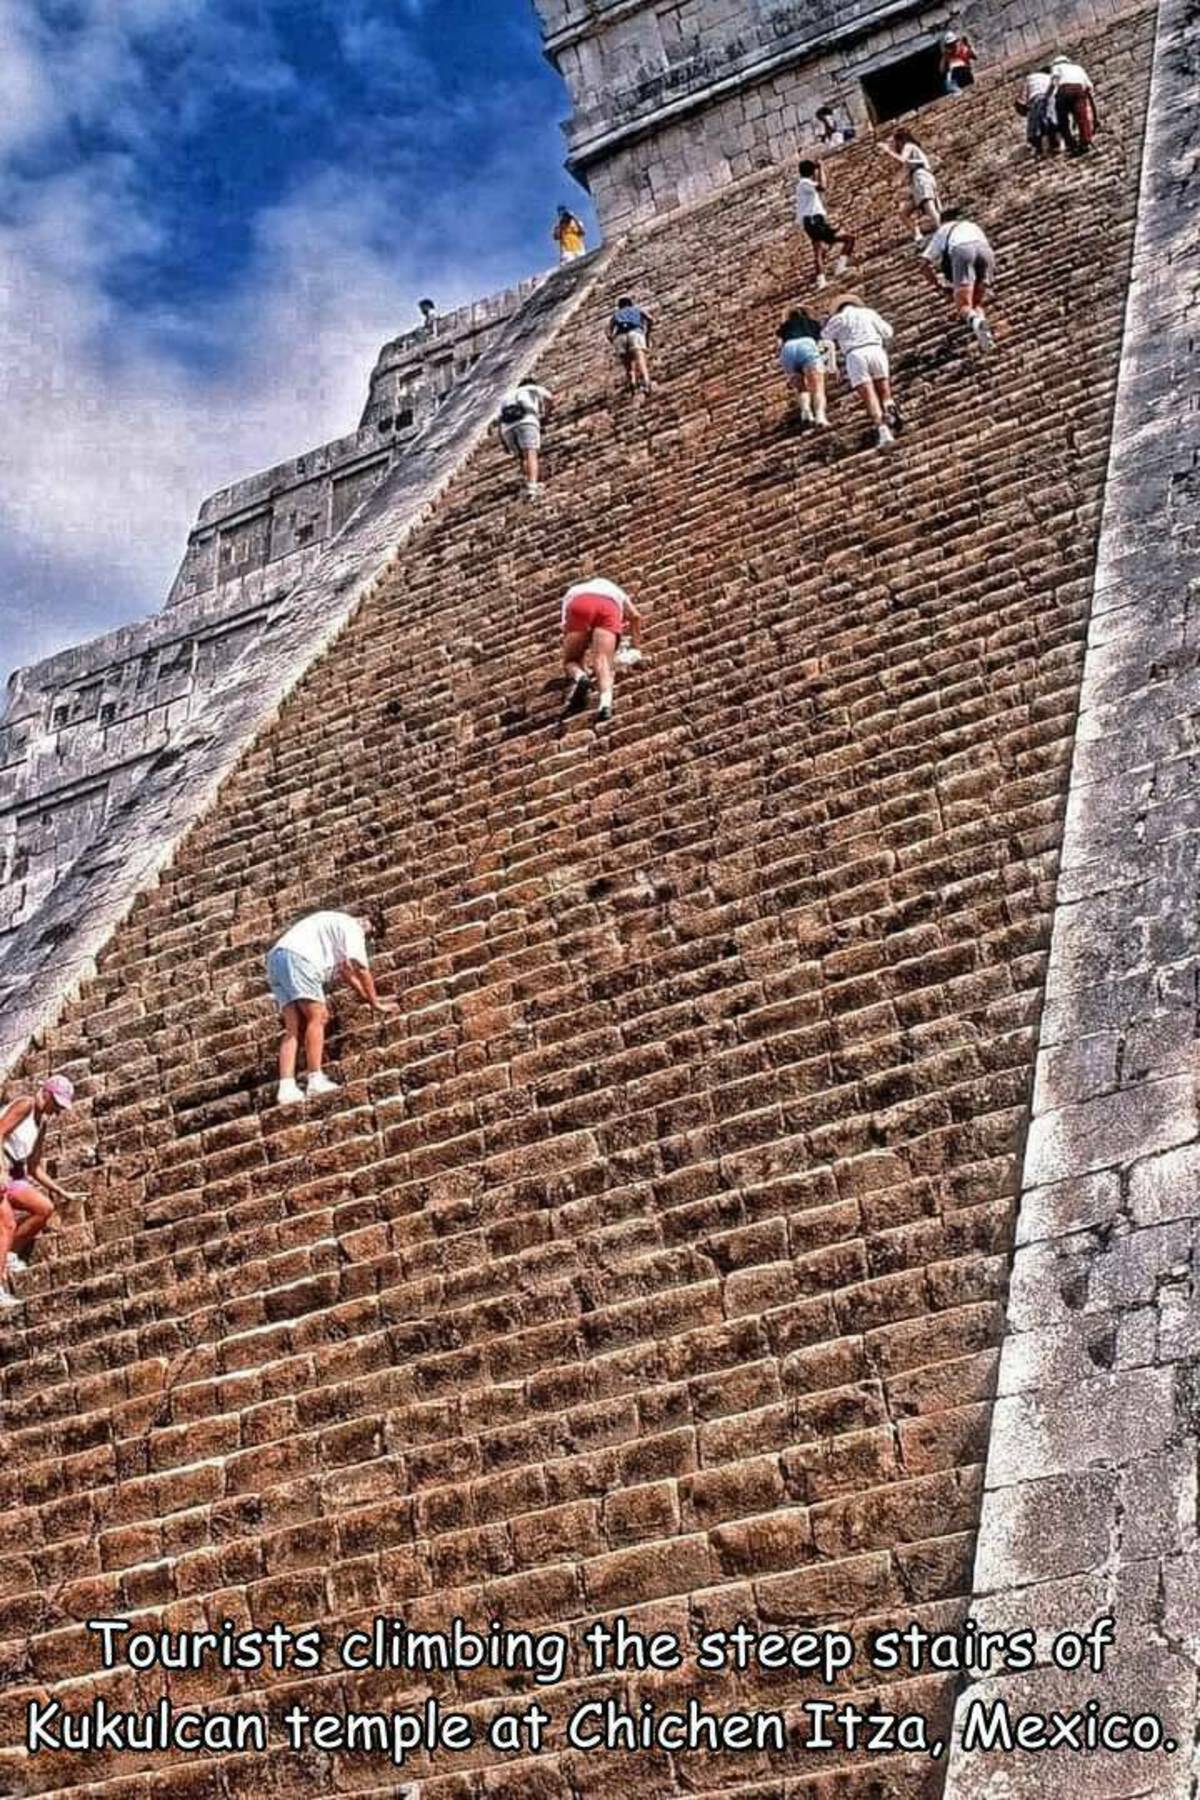 tourism - Tourists climbing the steep stairs of Kukulcan temple at Chichen Itza, Mexico.